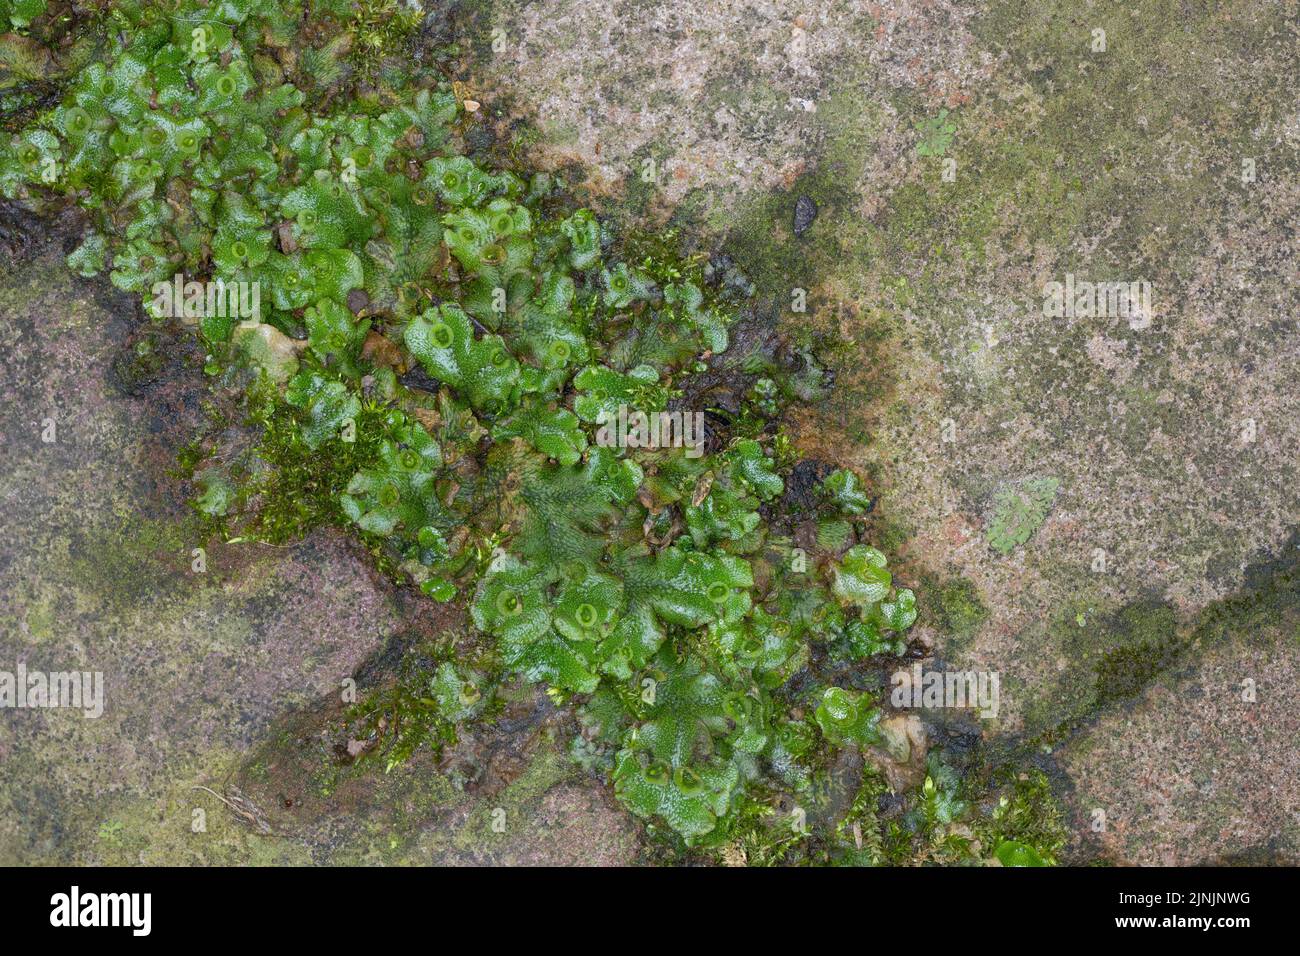 common liverwort, umbrella liverwort (Marchantia polymorpha), with gemma cups in a paving gap, Germany Stock Photo